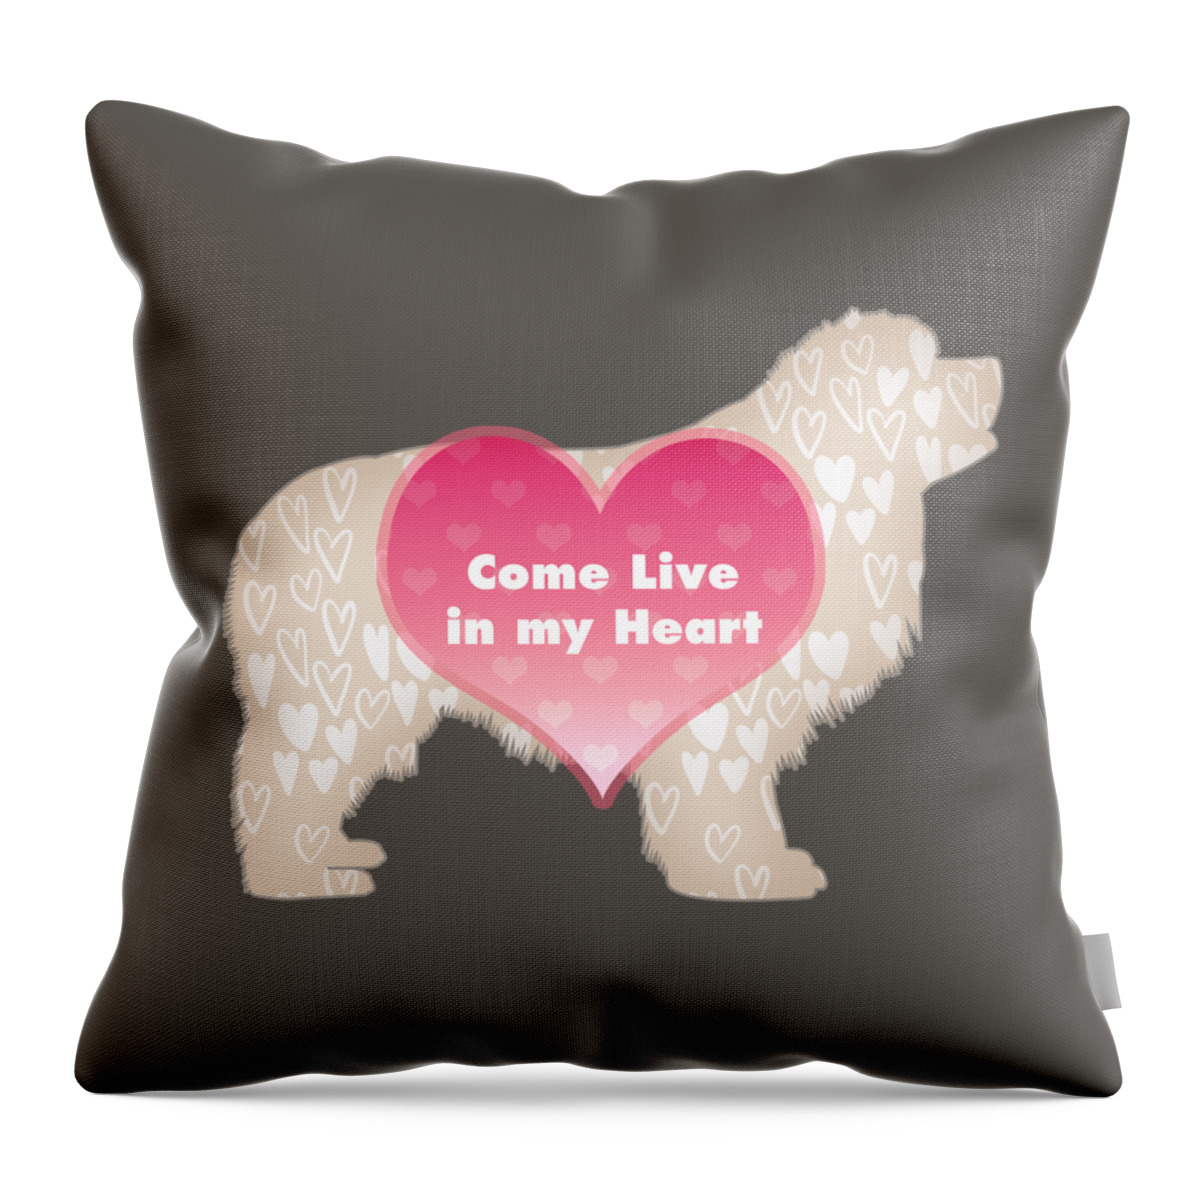 Newf Throw Pillow featuring the digital art Come Live in My Heart by Christine Mullis